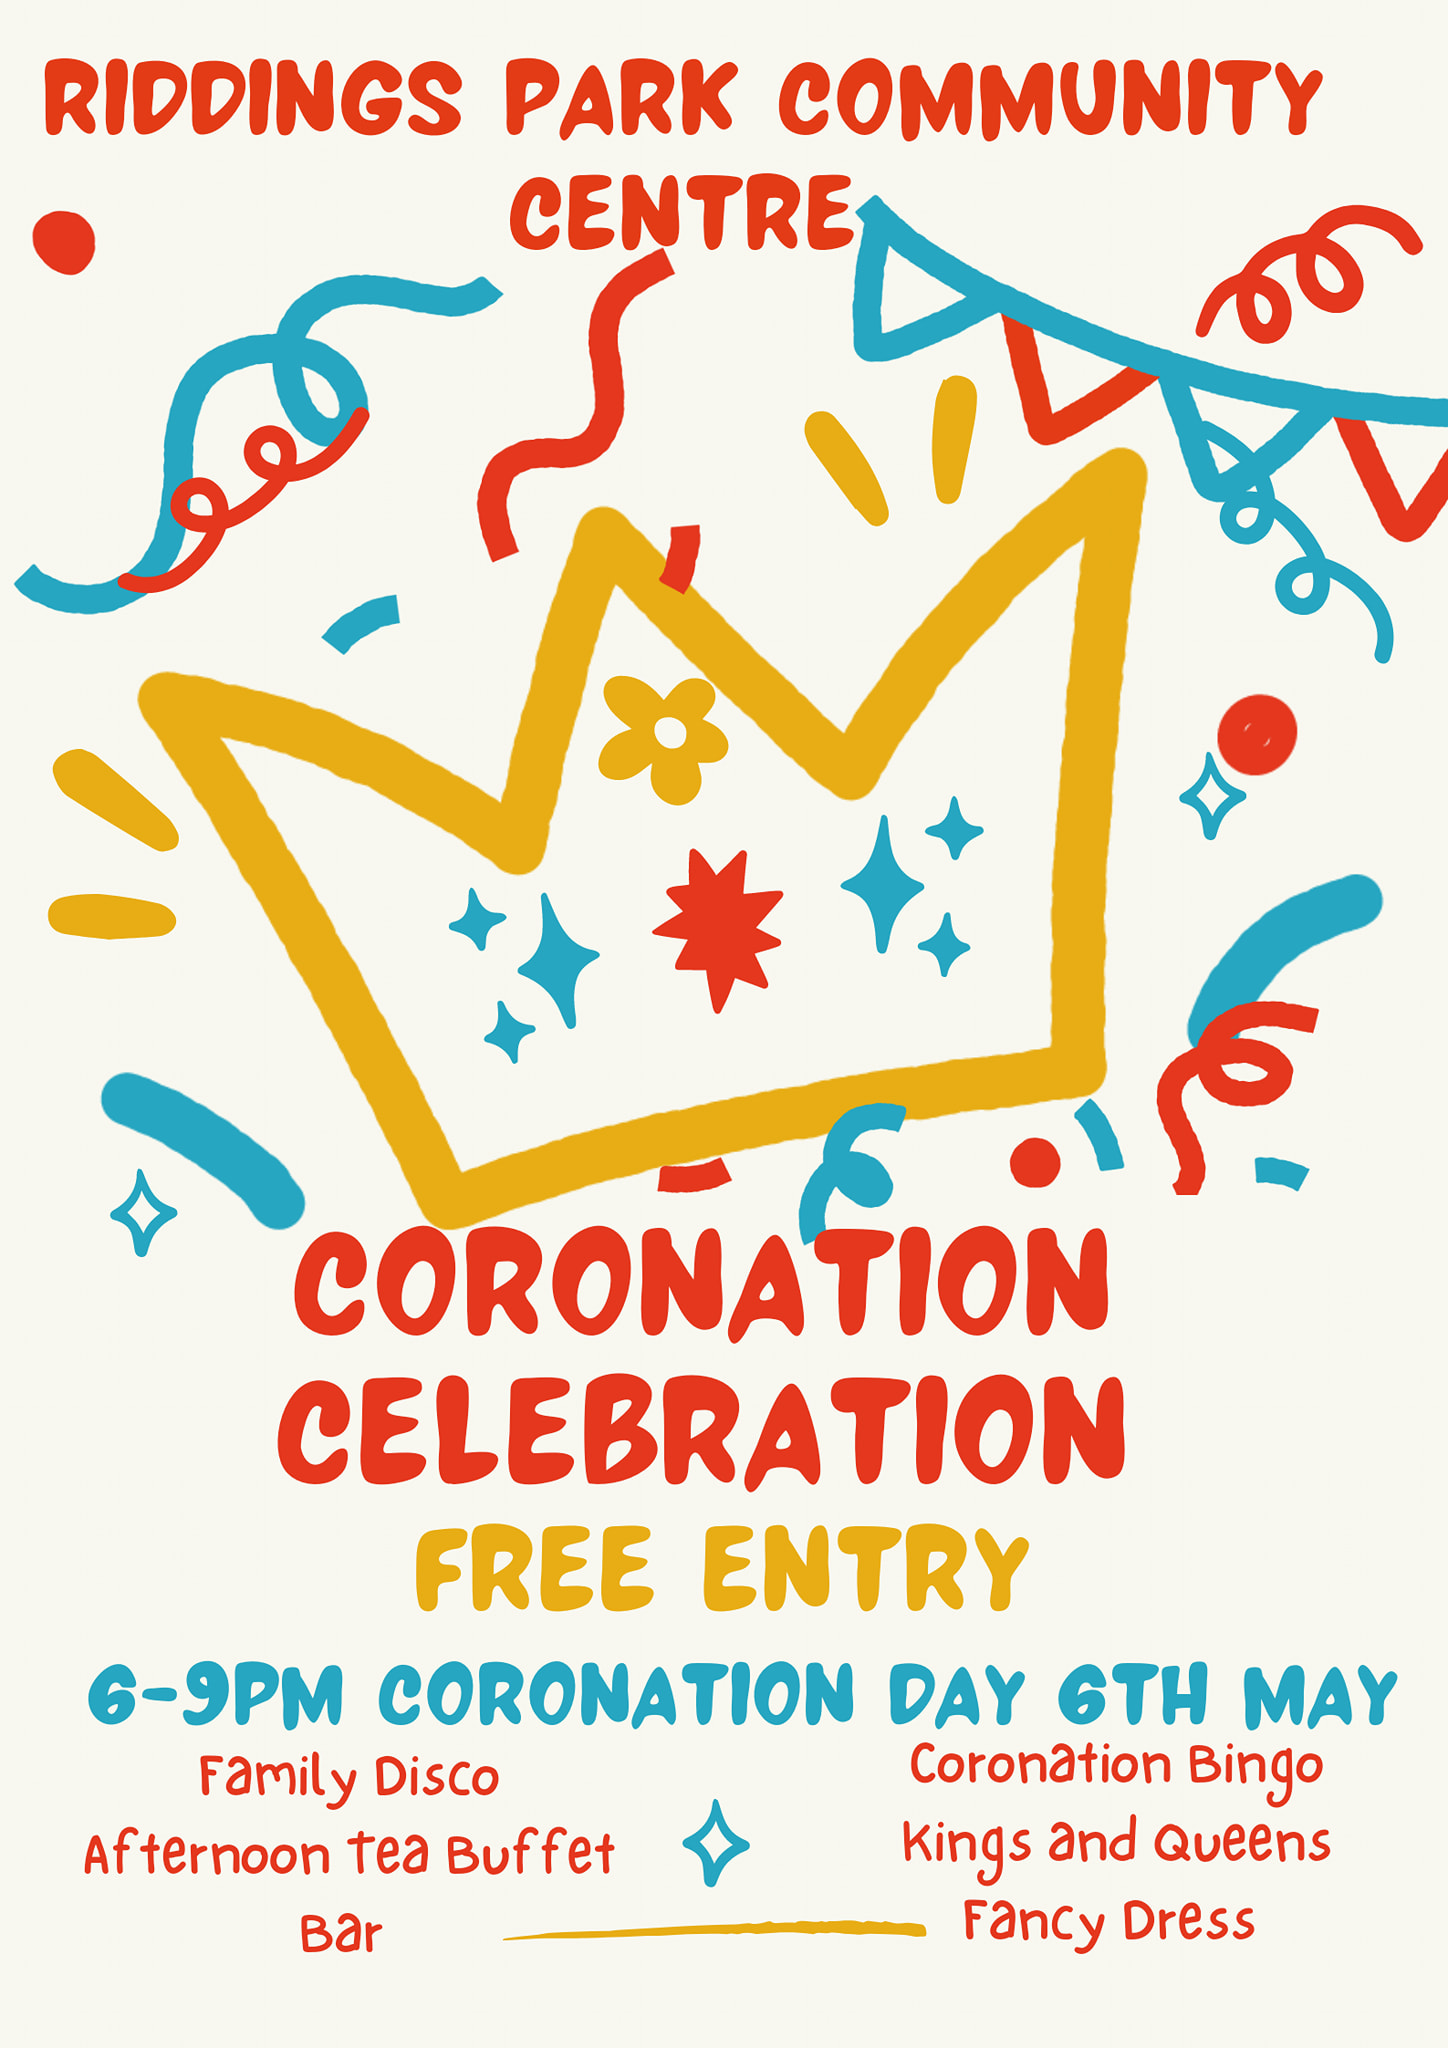 Riddings Park Community Centre will host a free coronation celebration for the whole family